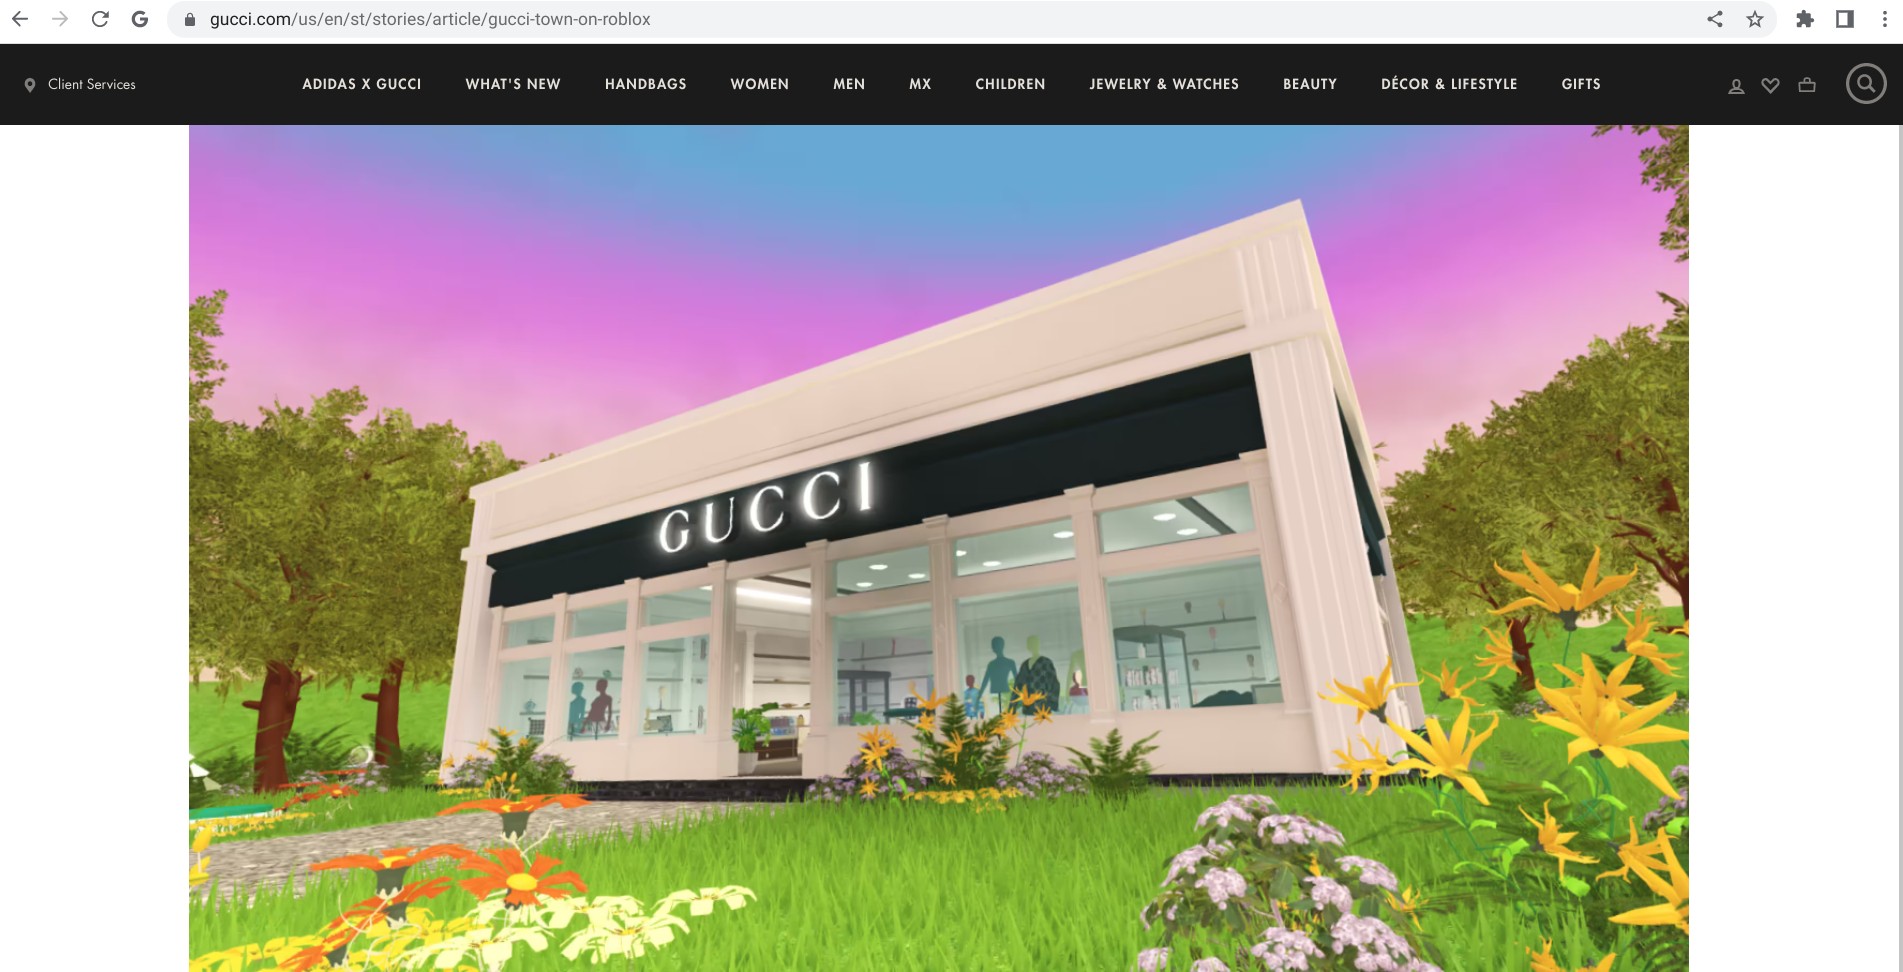 Screenshot of gucci.com displaying the virtual Gucci storefront on Roblox